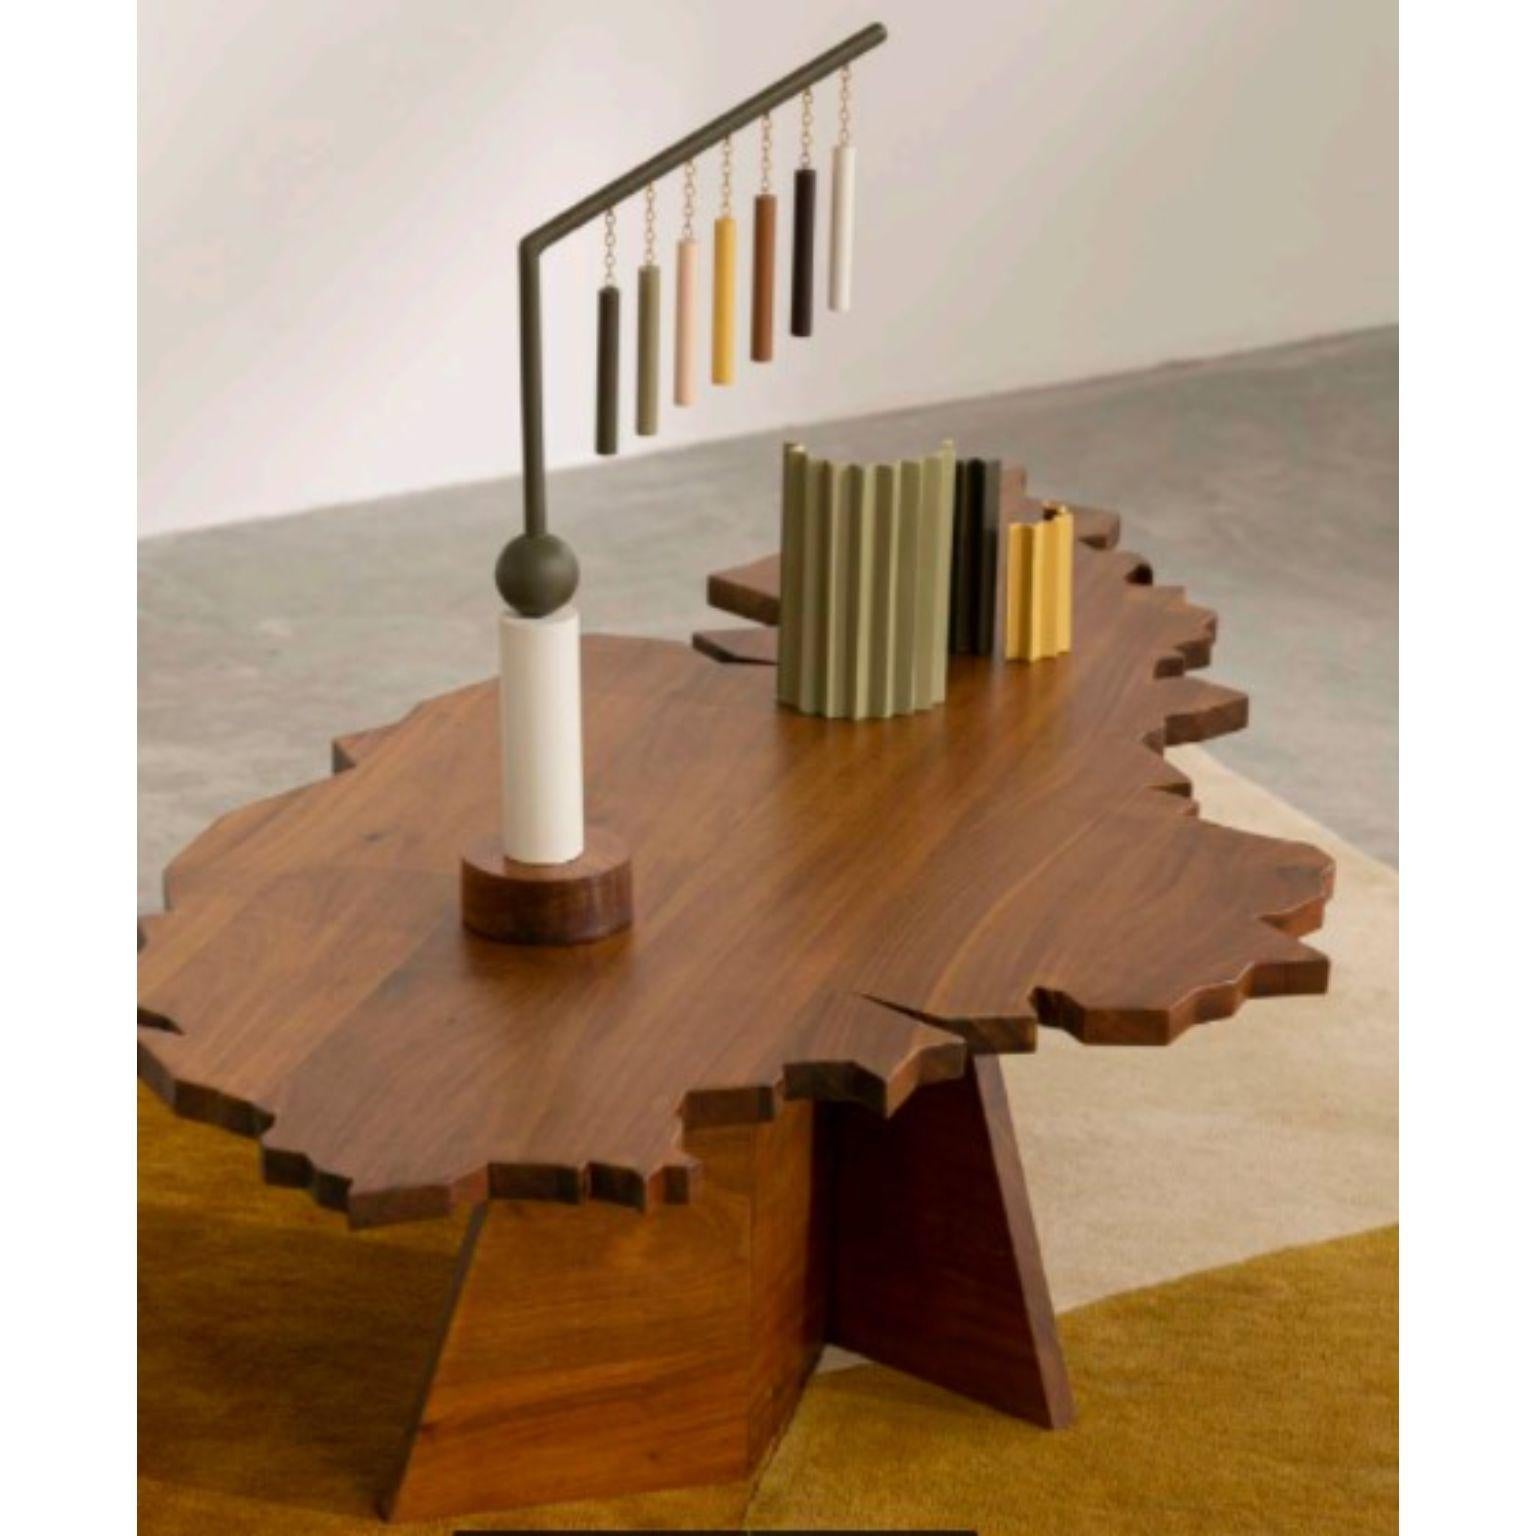 Set of 3 table and objects by Sofia Alvarado
Dimensions: D150 x W70 x H40 cm
Materials: Zapatero Wood

FI is an ornamental artist who embodies the creative revelation of the sensitivity of the innate being, with uninhibited freedom by proposing